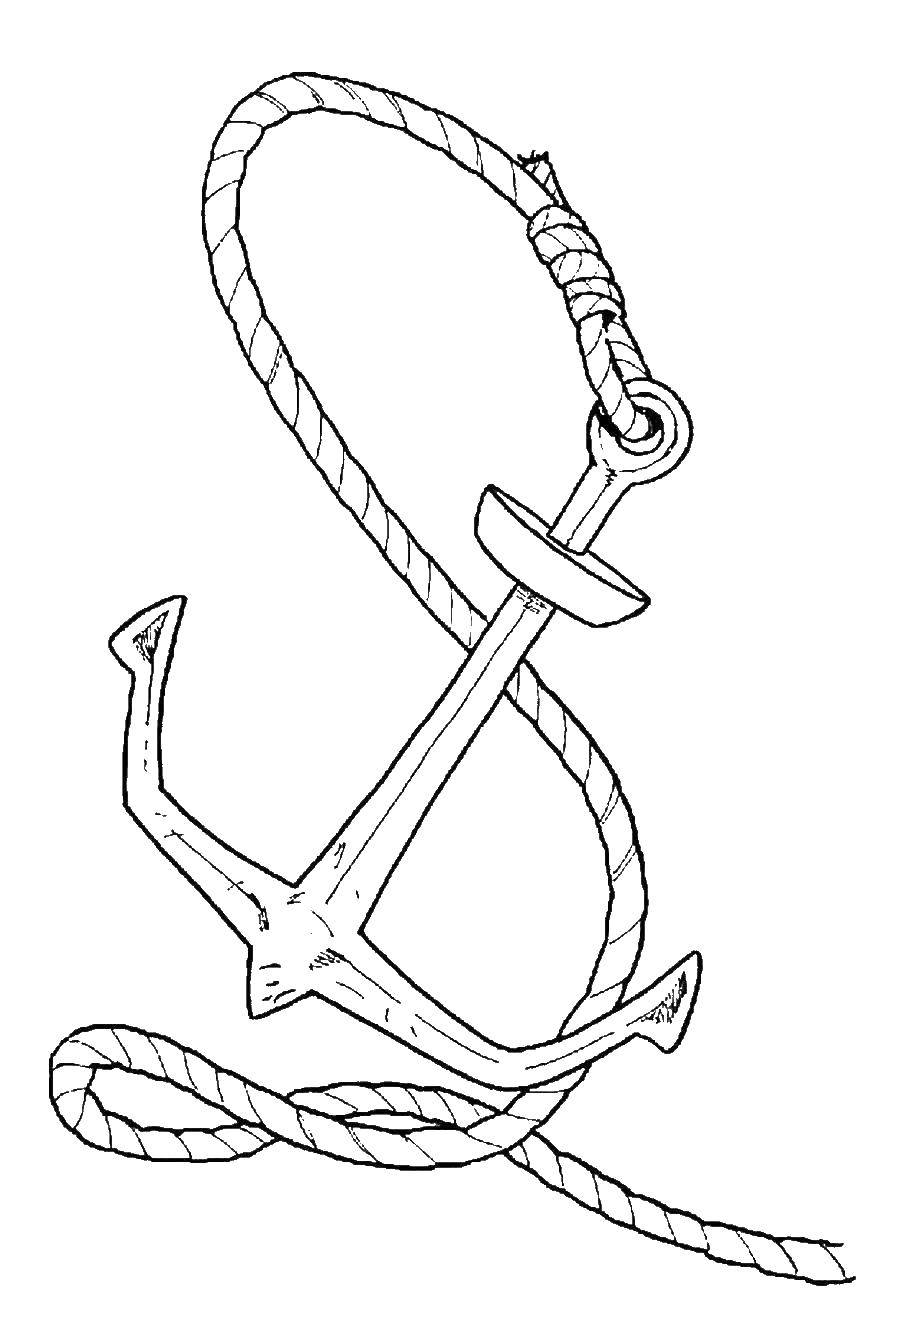 Coloring Anchor on rope. Category The pirates. Tags:  Pirate, sea.